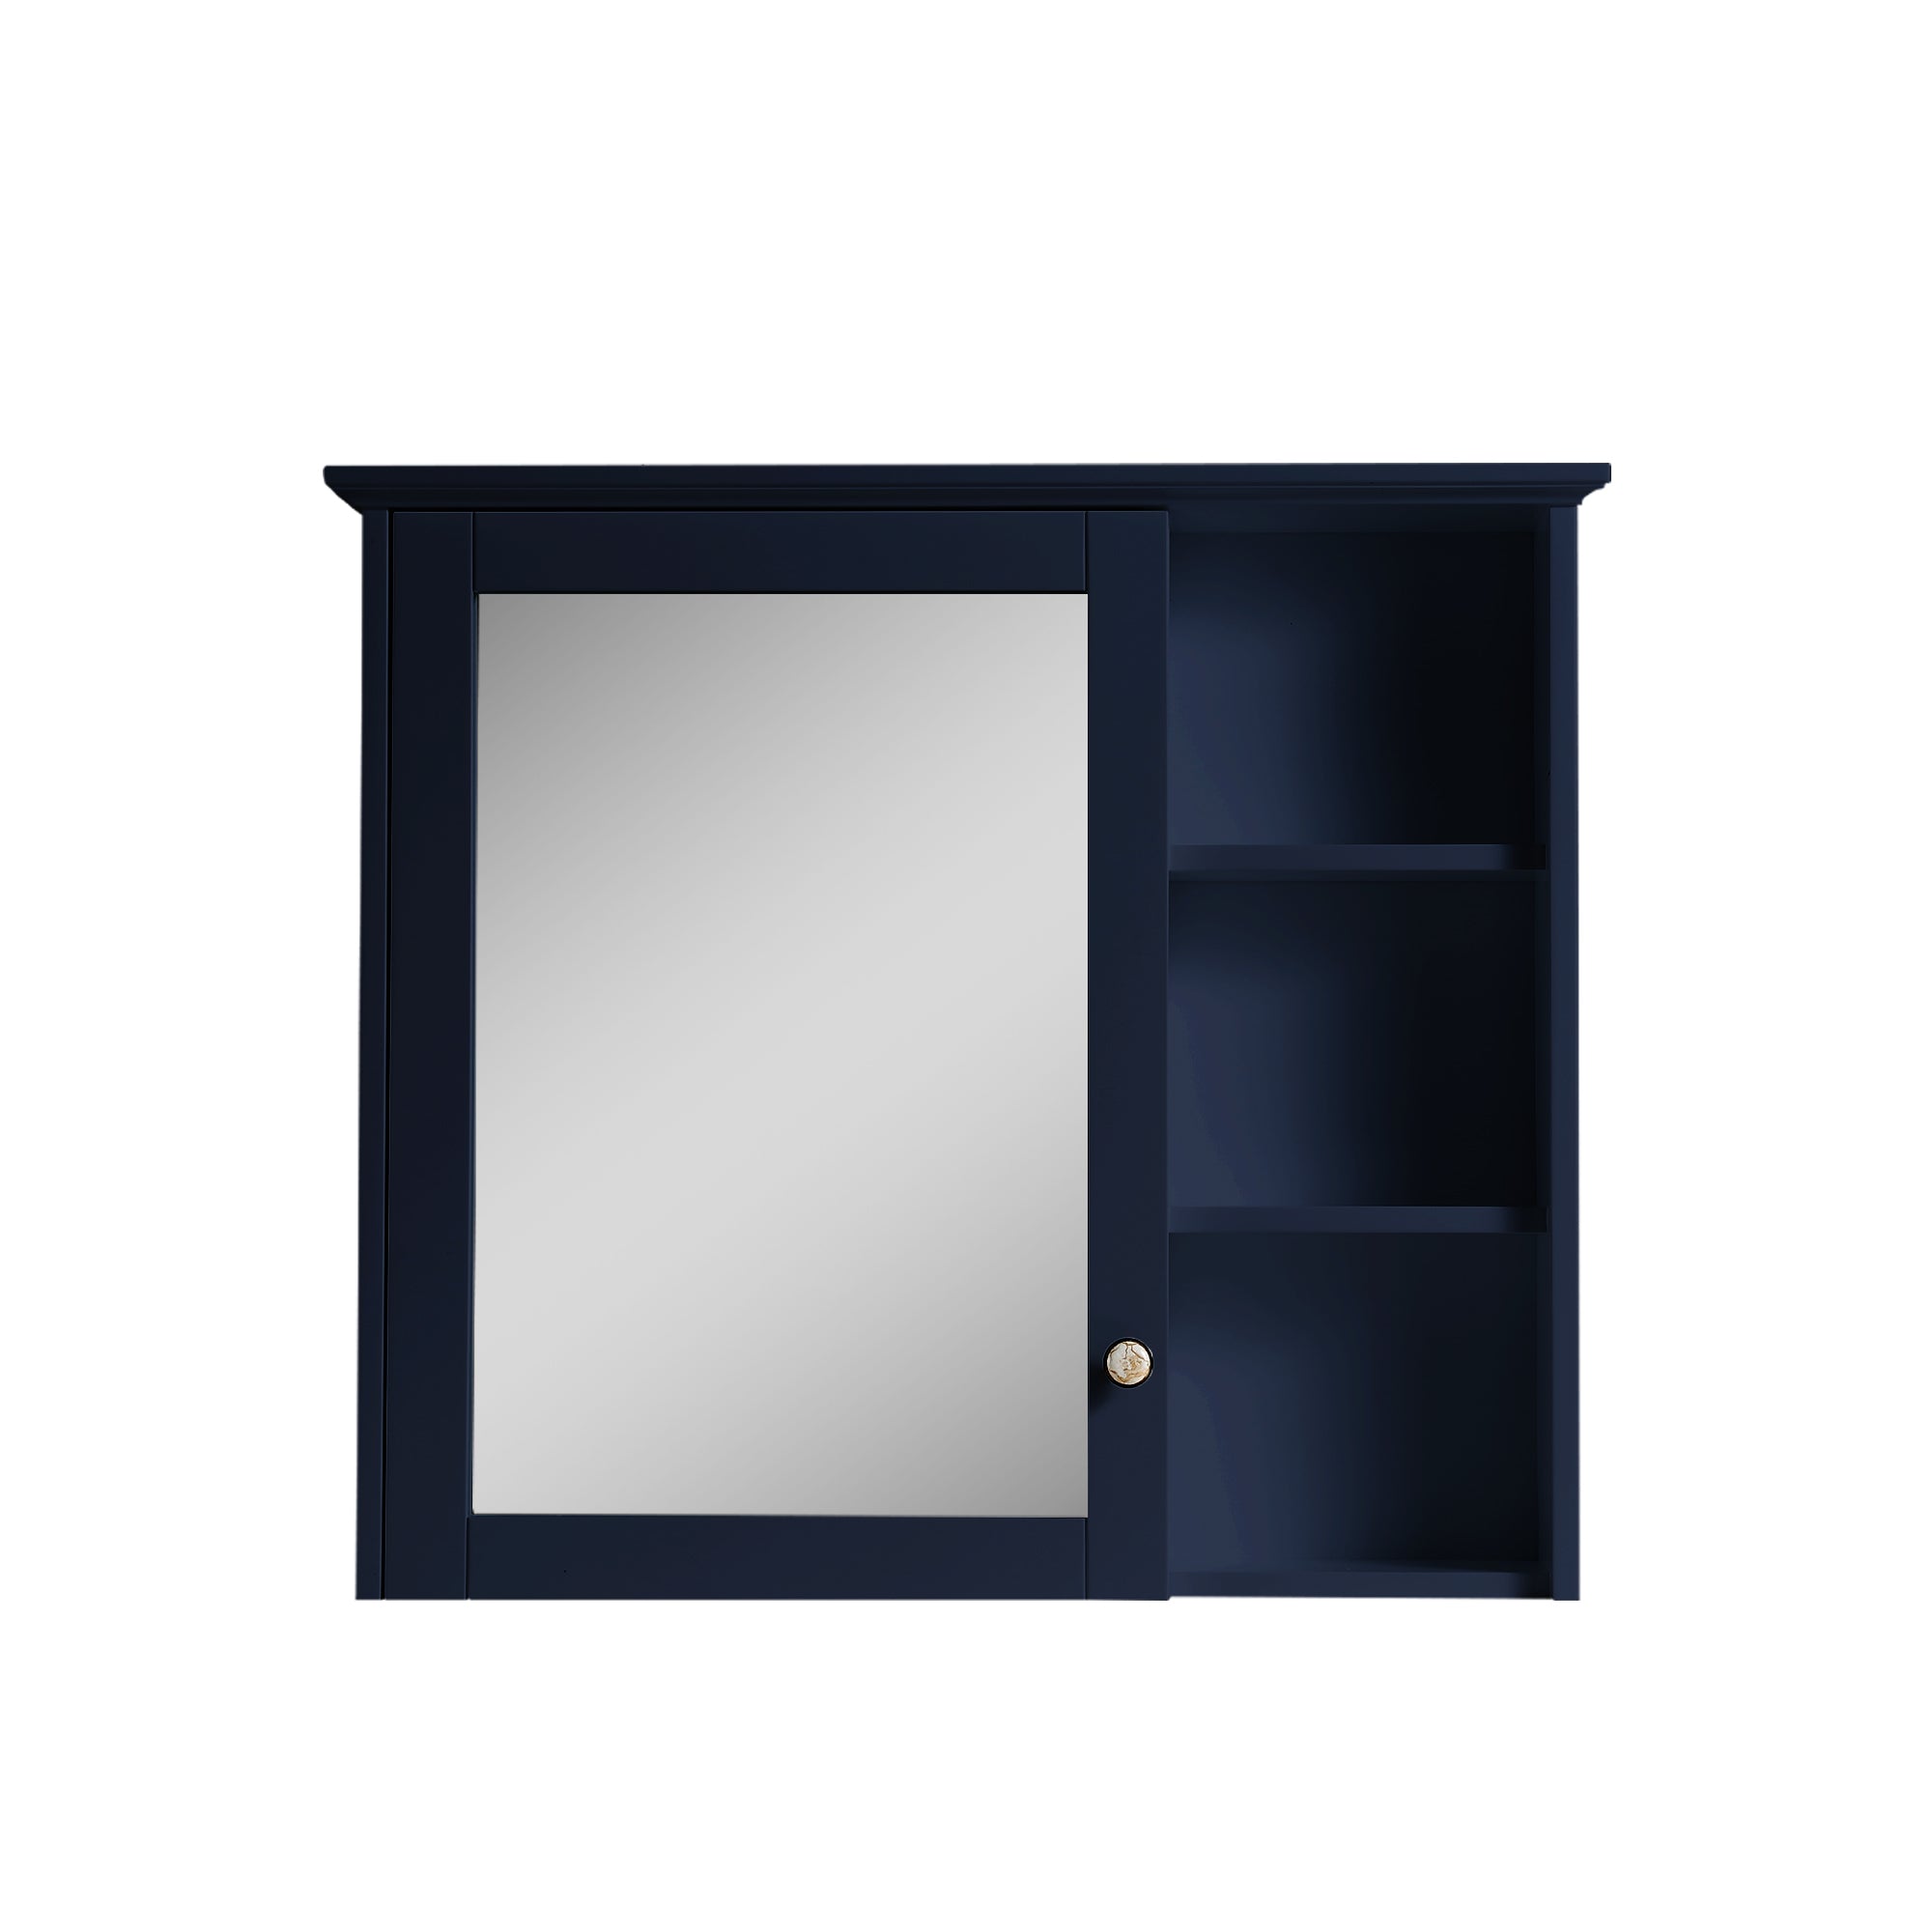 34 in. W x 30 in. H Rectangular White Wood Frame Surface Mount Medicine Cabinet with Mirror